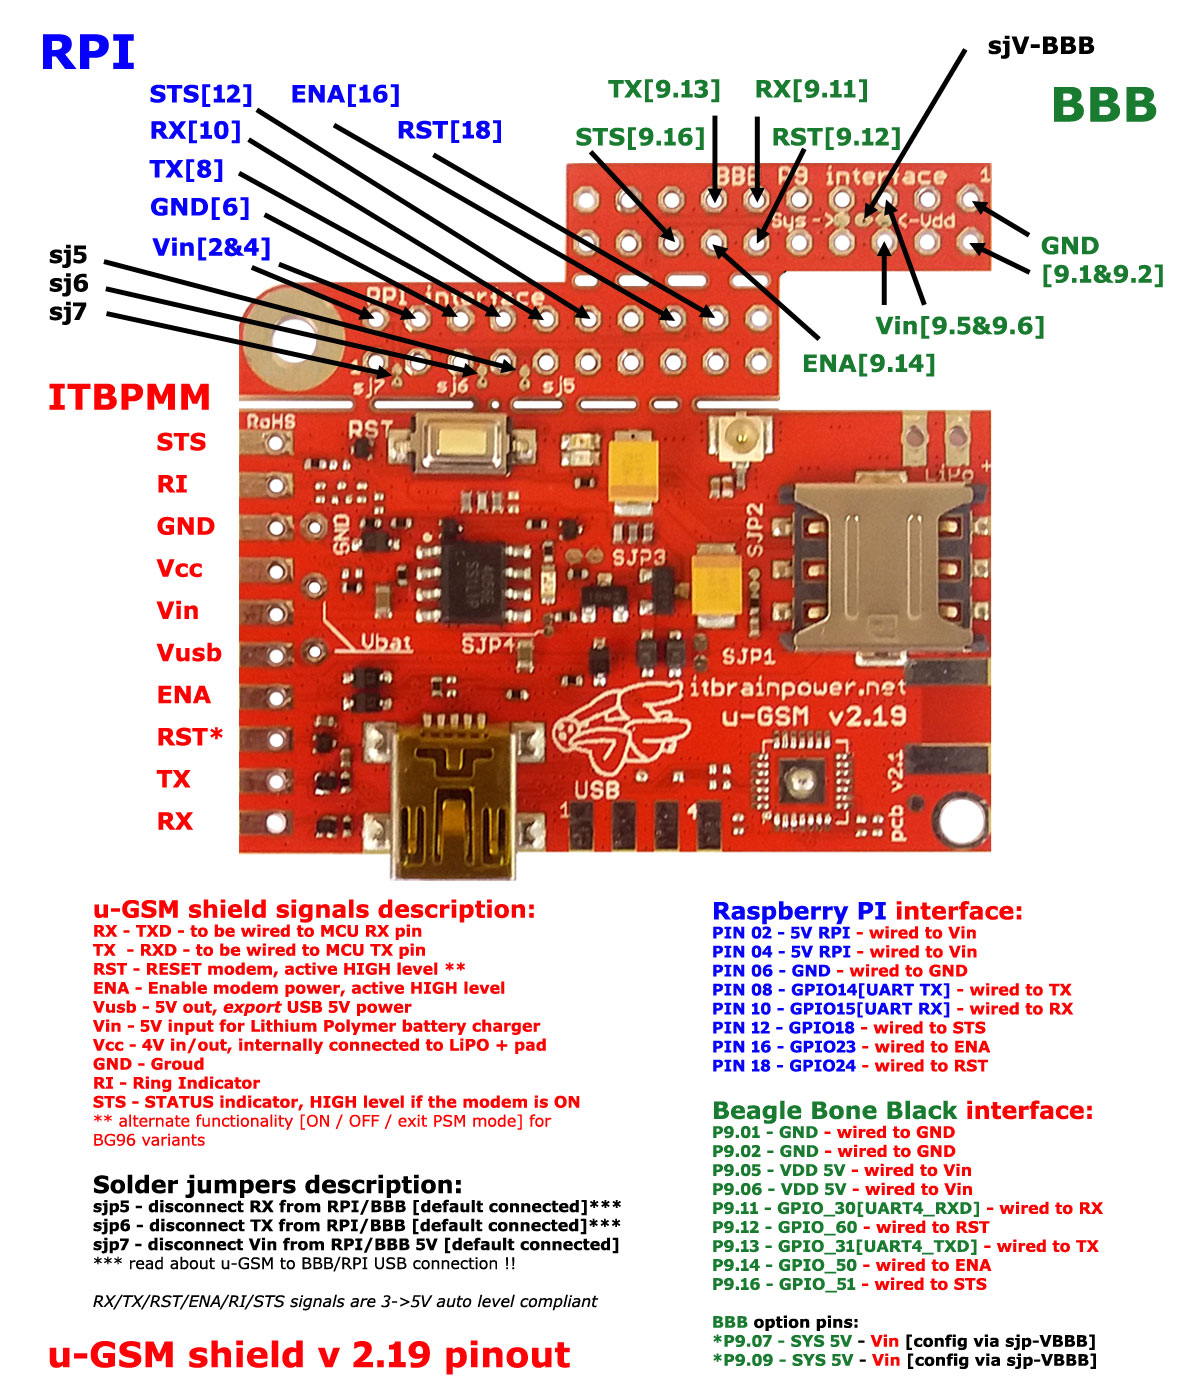 u-GSM modem pinout and embedded BBB P9 interface